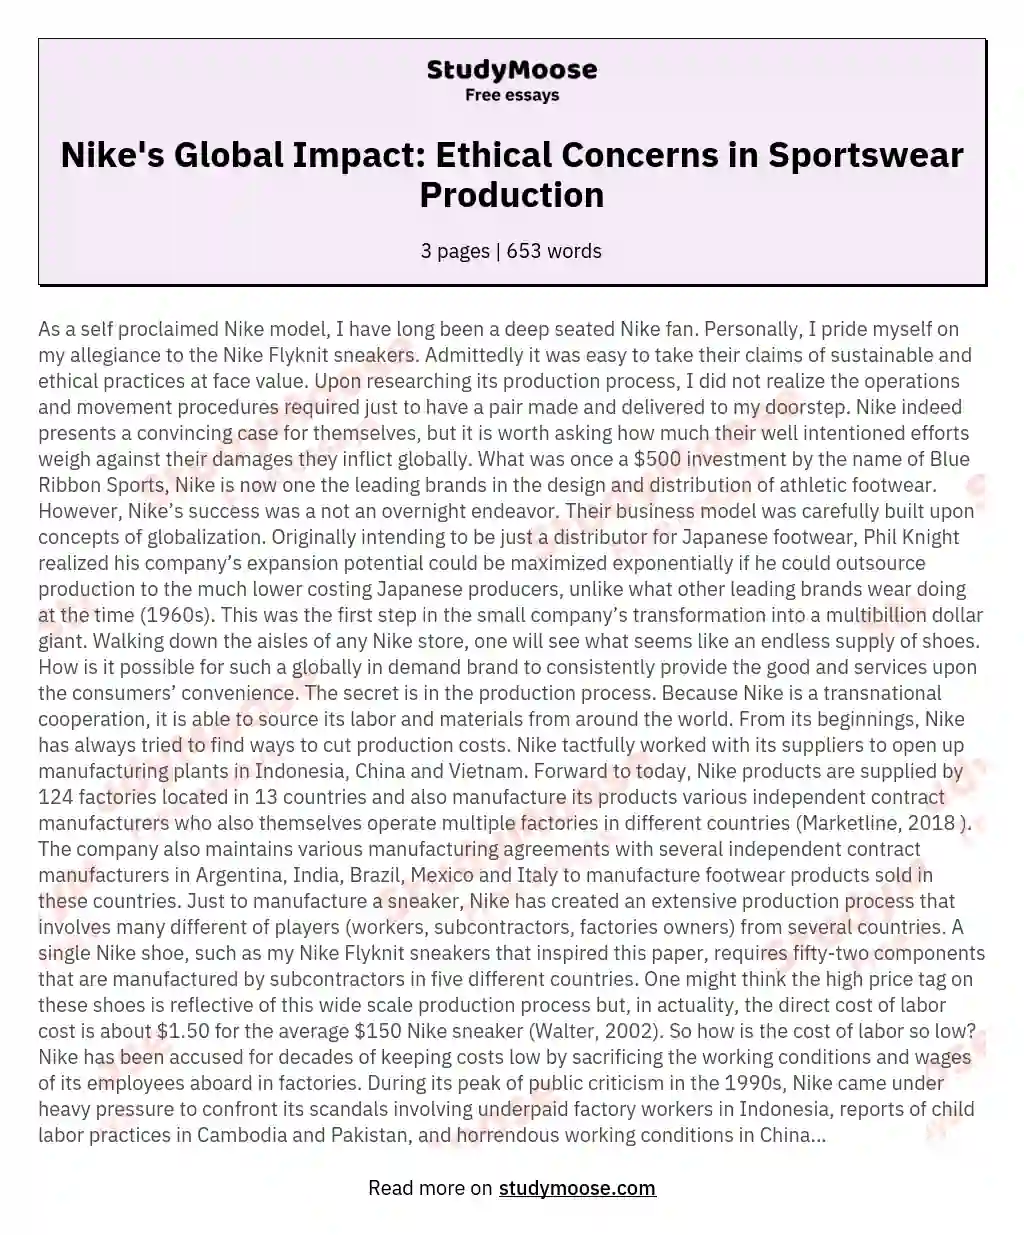 Nike's Global Impact: Ethical Concerns in Sportswear Production essay